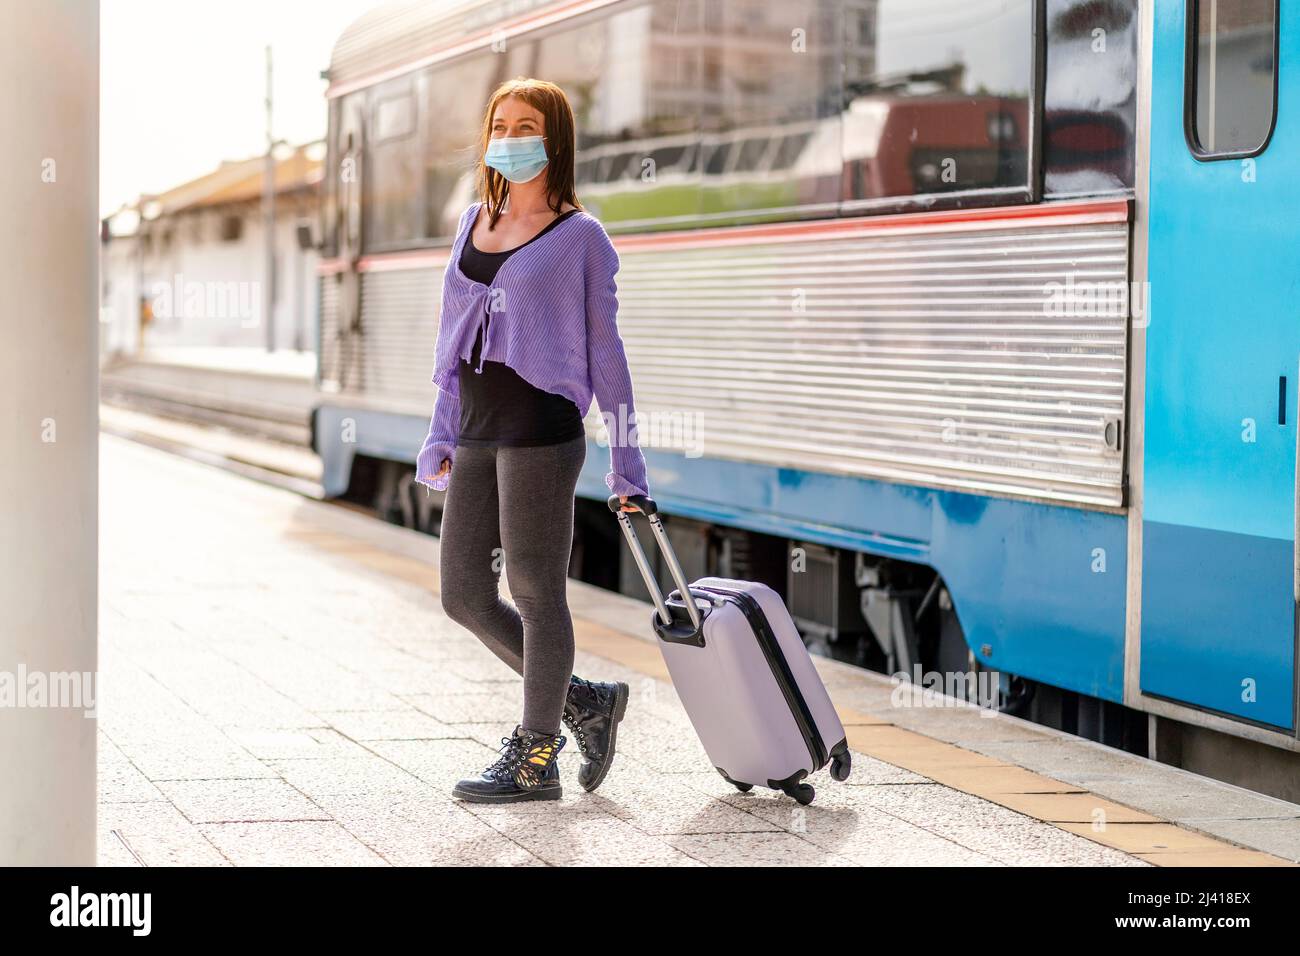 A young woman in a mask and with luggage walking on the platform of a train station at her destination Stock Photo